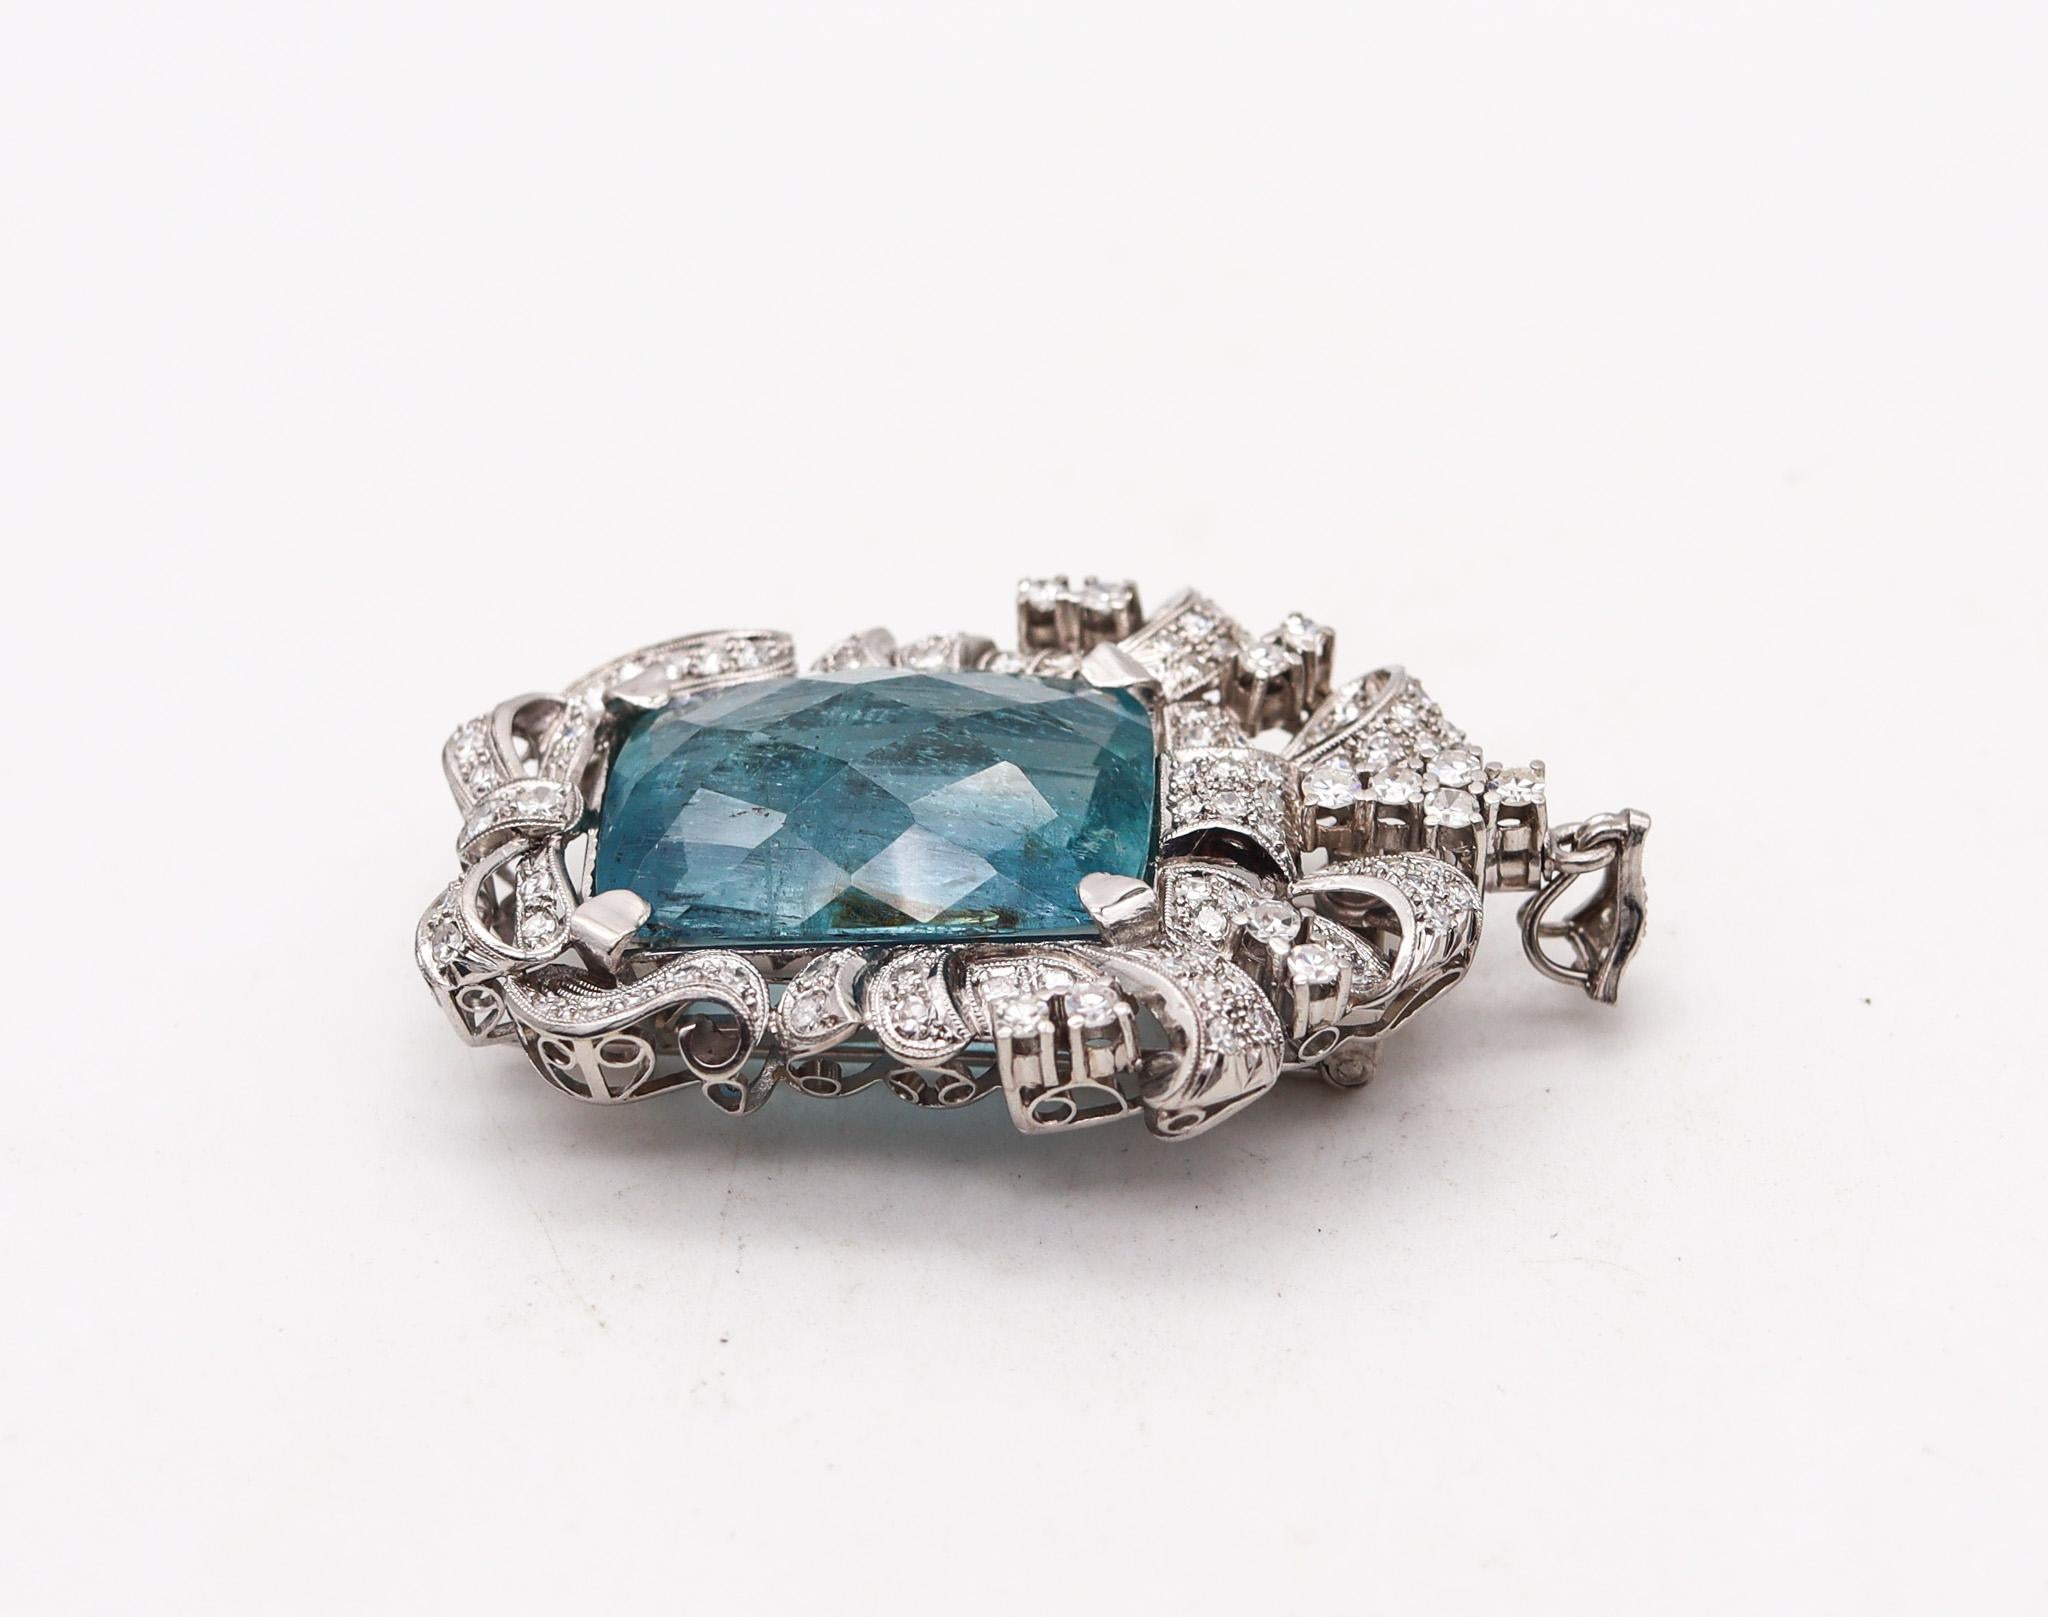 Art deco convertible pendant brooch with aquamarine.

This is an extraordinary piece of jewelry, created during the art deco period, back in the 1930. This beautiful and versatile piece can be converted into a pendant or a brooch and wear in